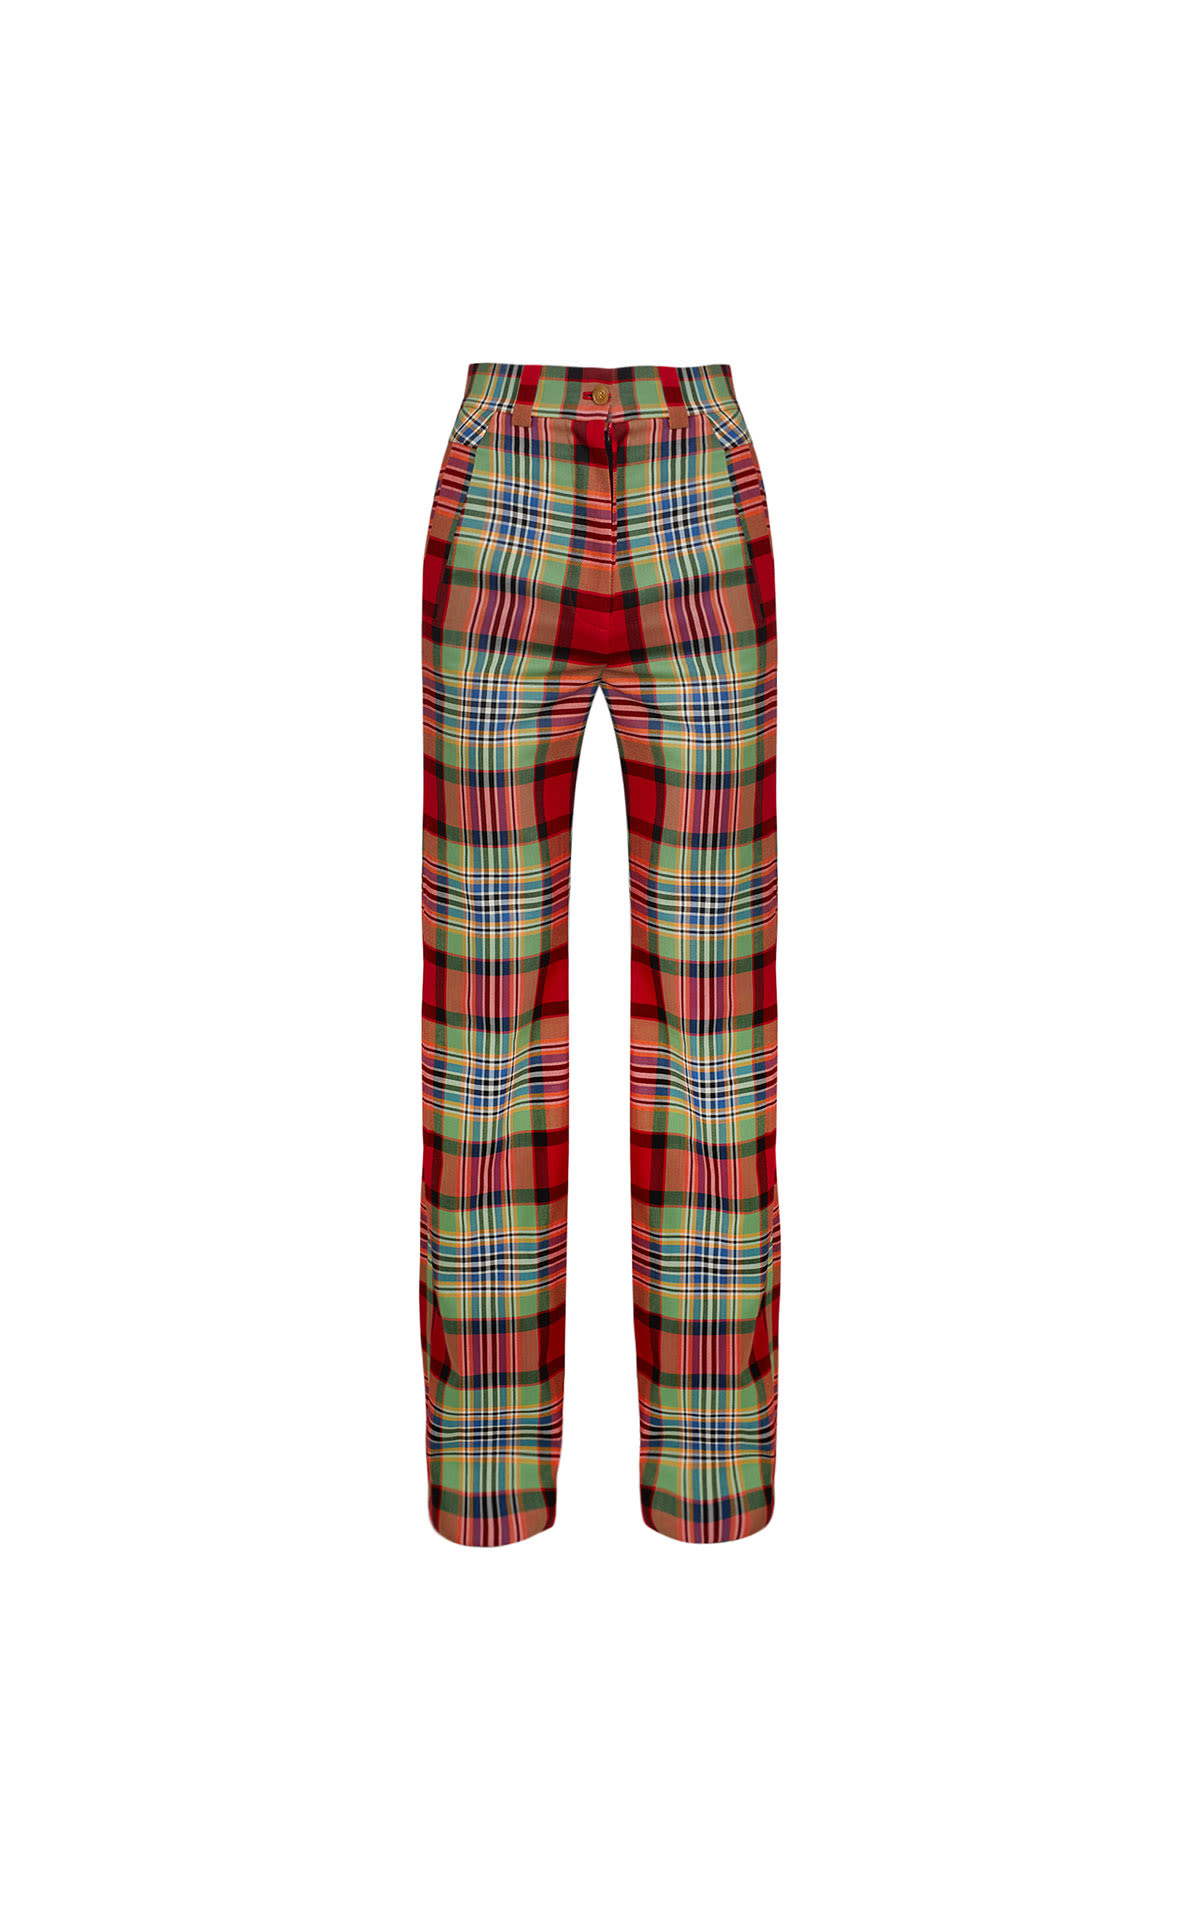 Vivienne Westwood New Ray trousers from Bicester Village